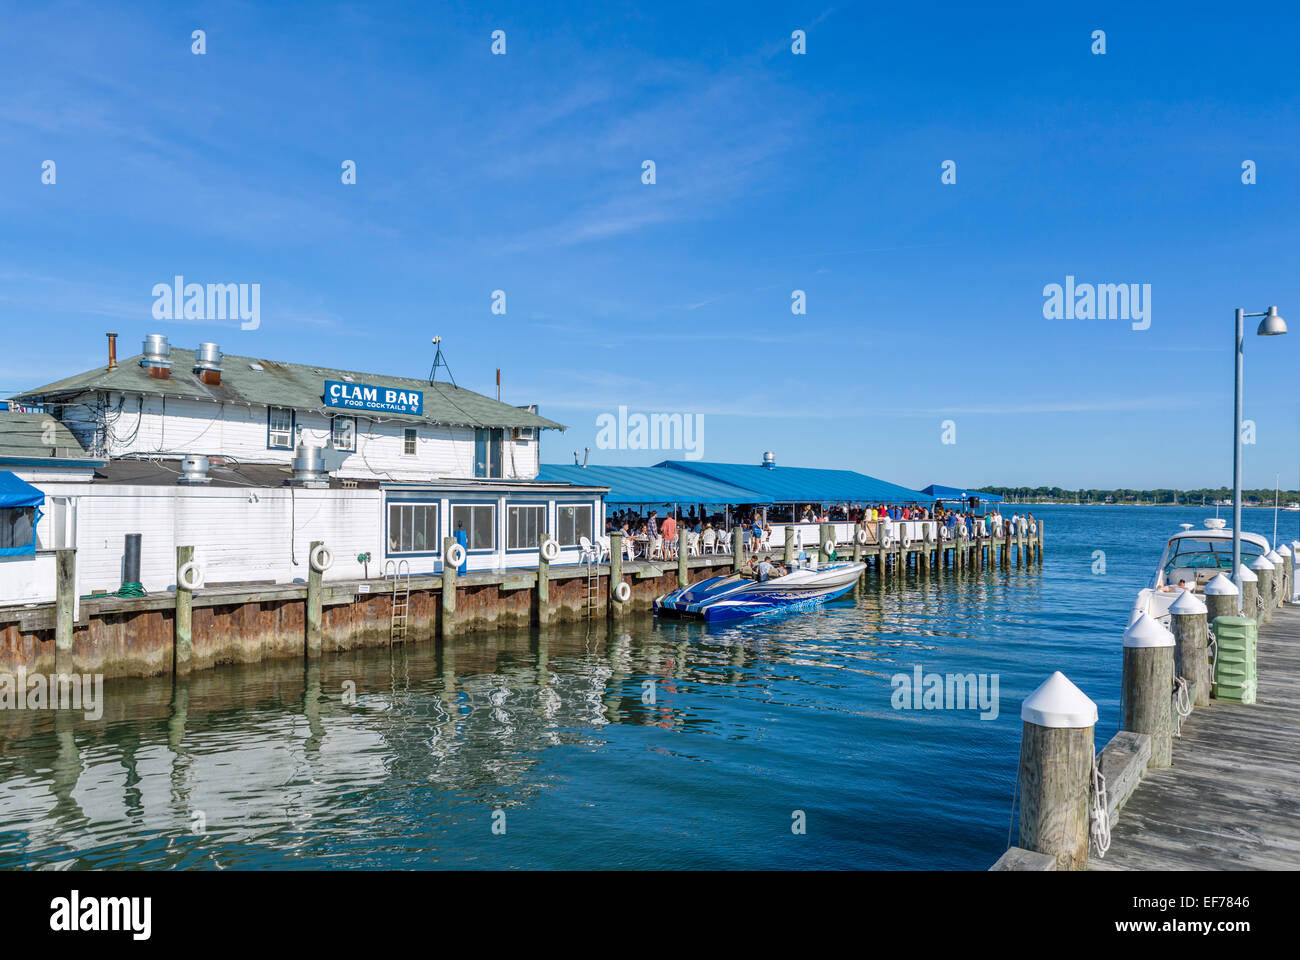 Waterfront restaurant in the village of Greenport, Suffolk County, Long